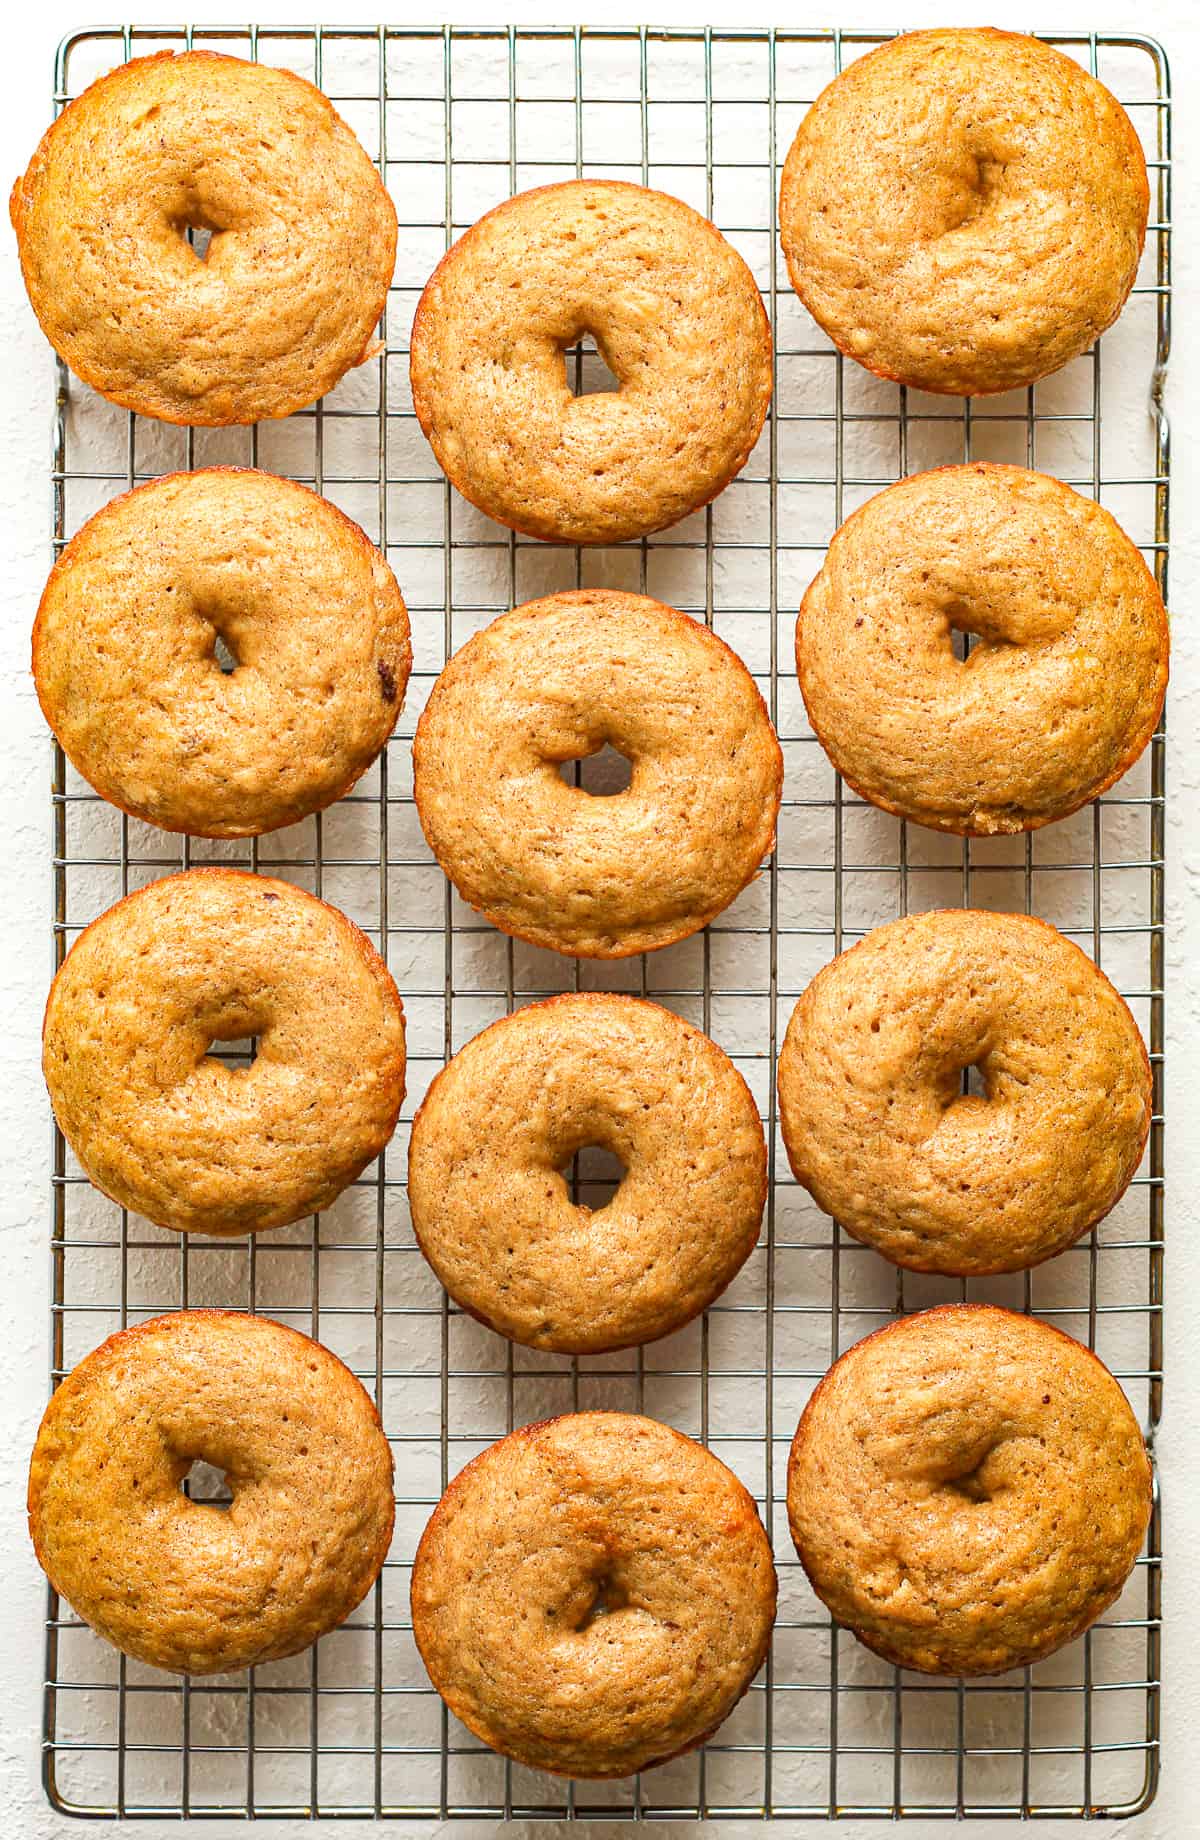 A cooling rack of 12 banana donuts.